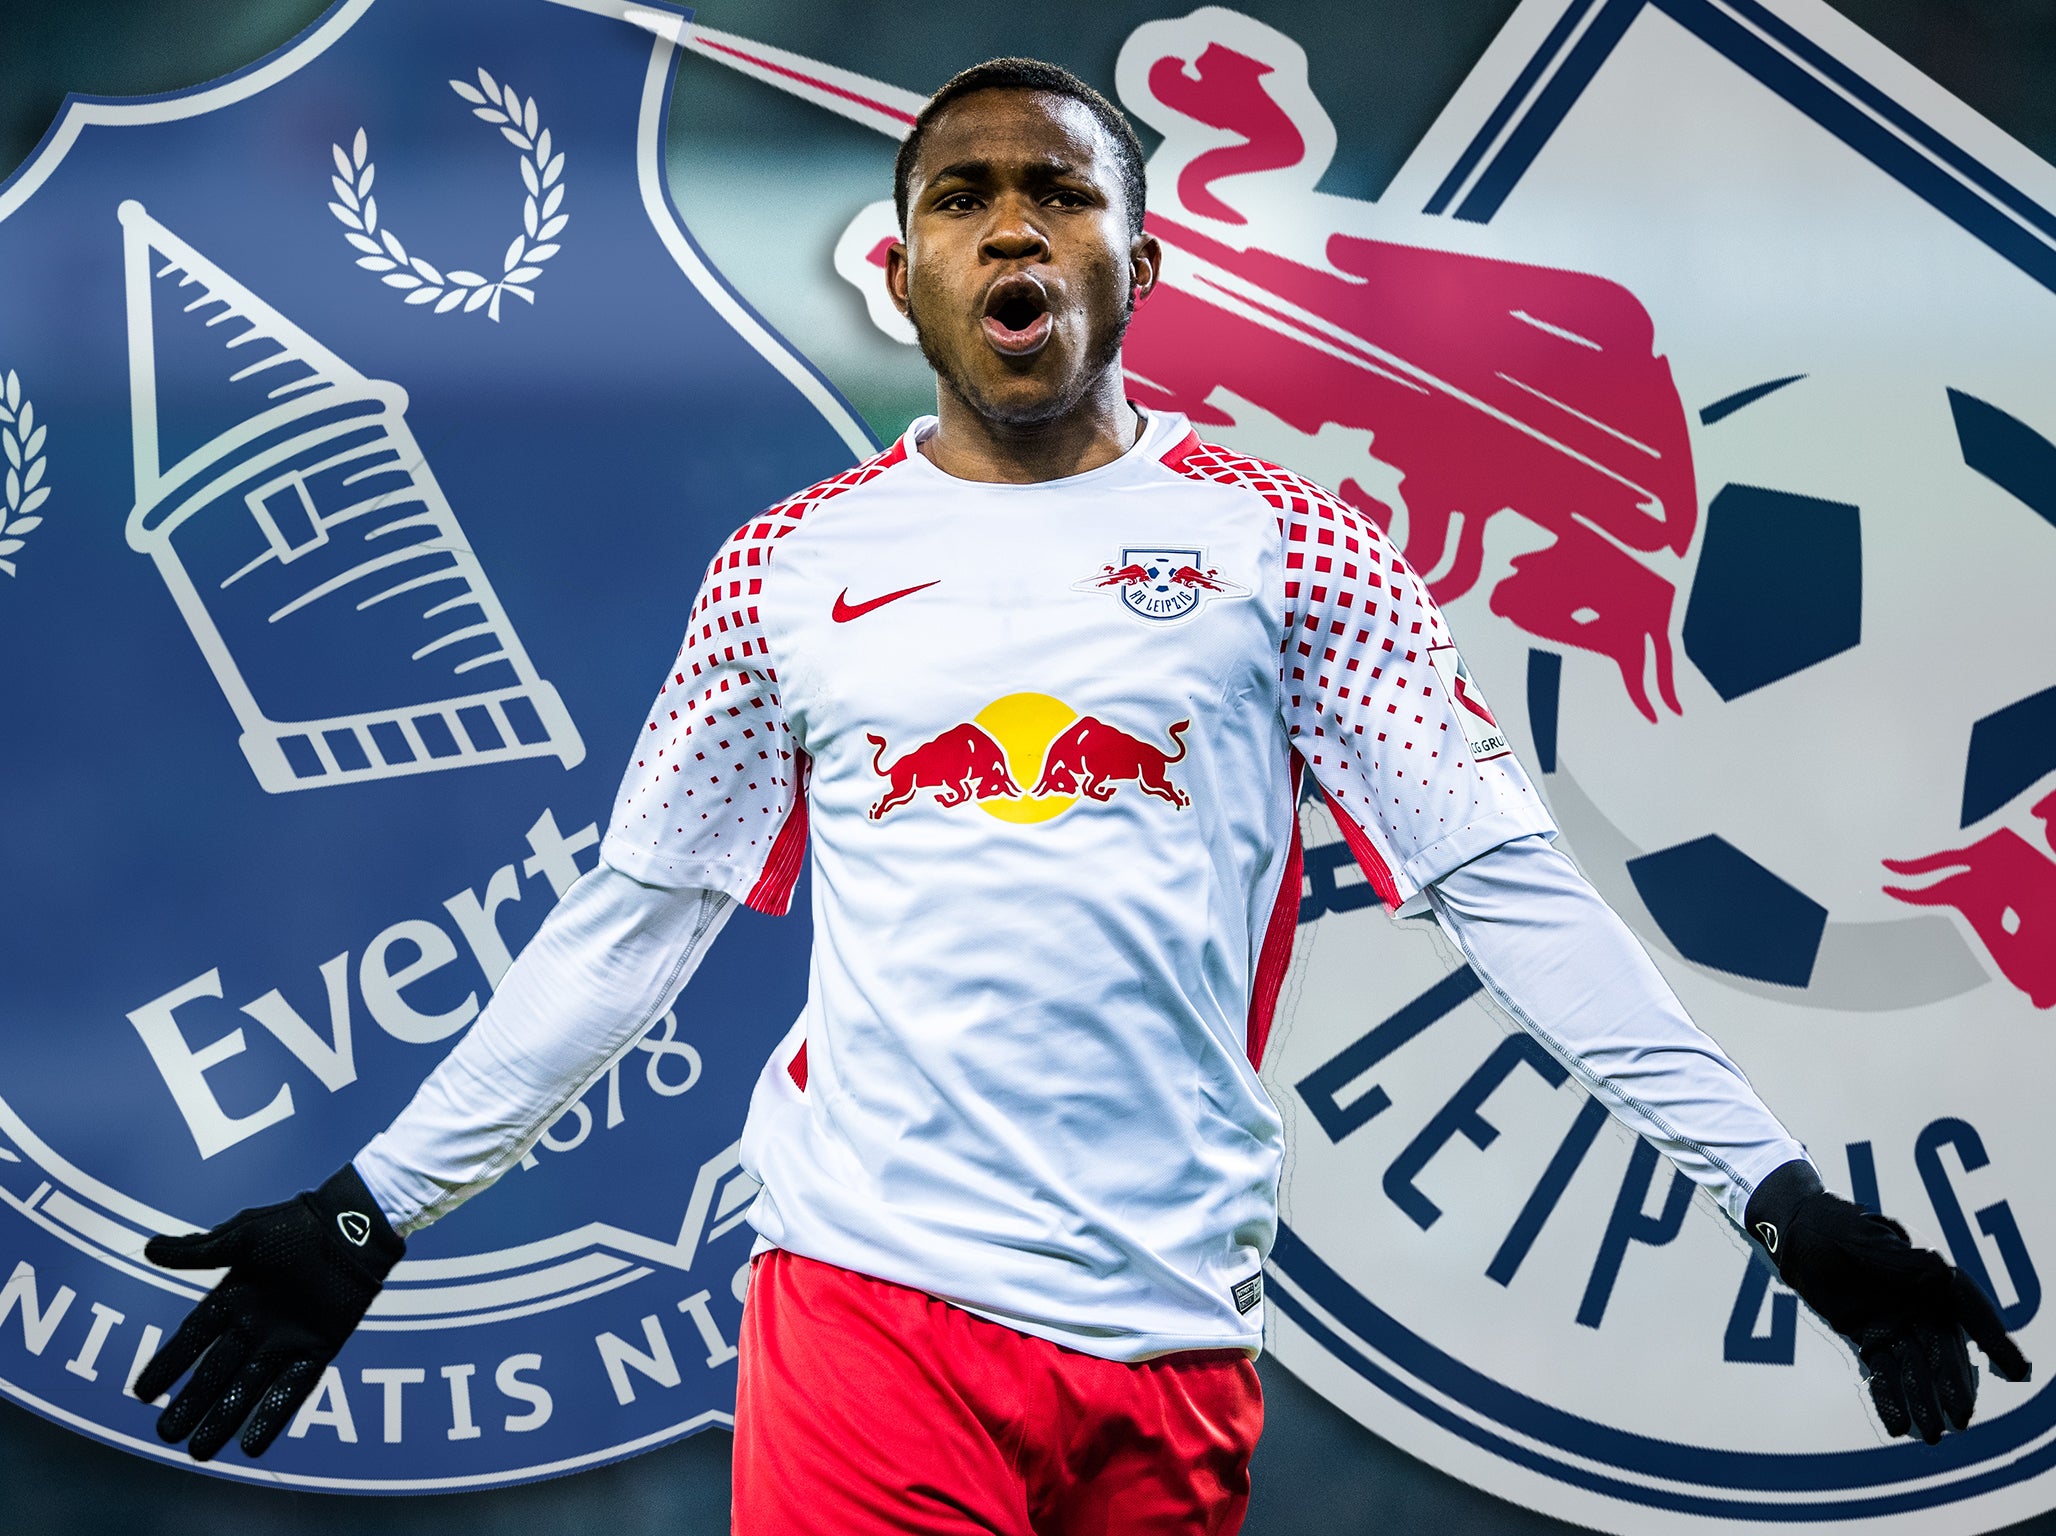 Ademola Lookman has been linked with a move away